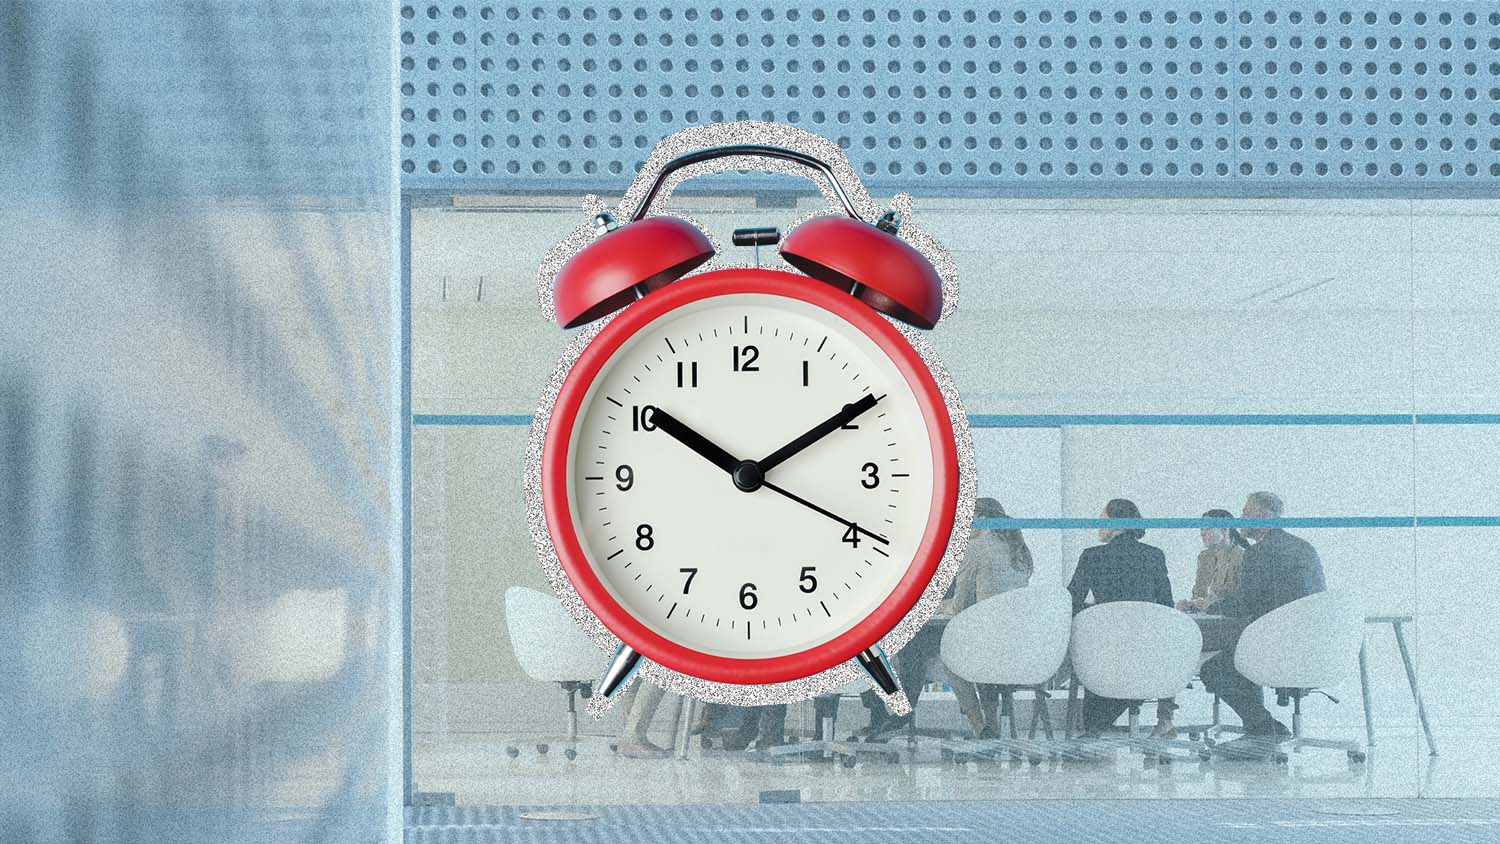 Clock over a meeting